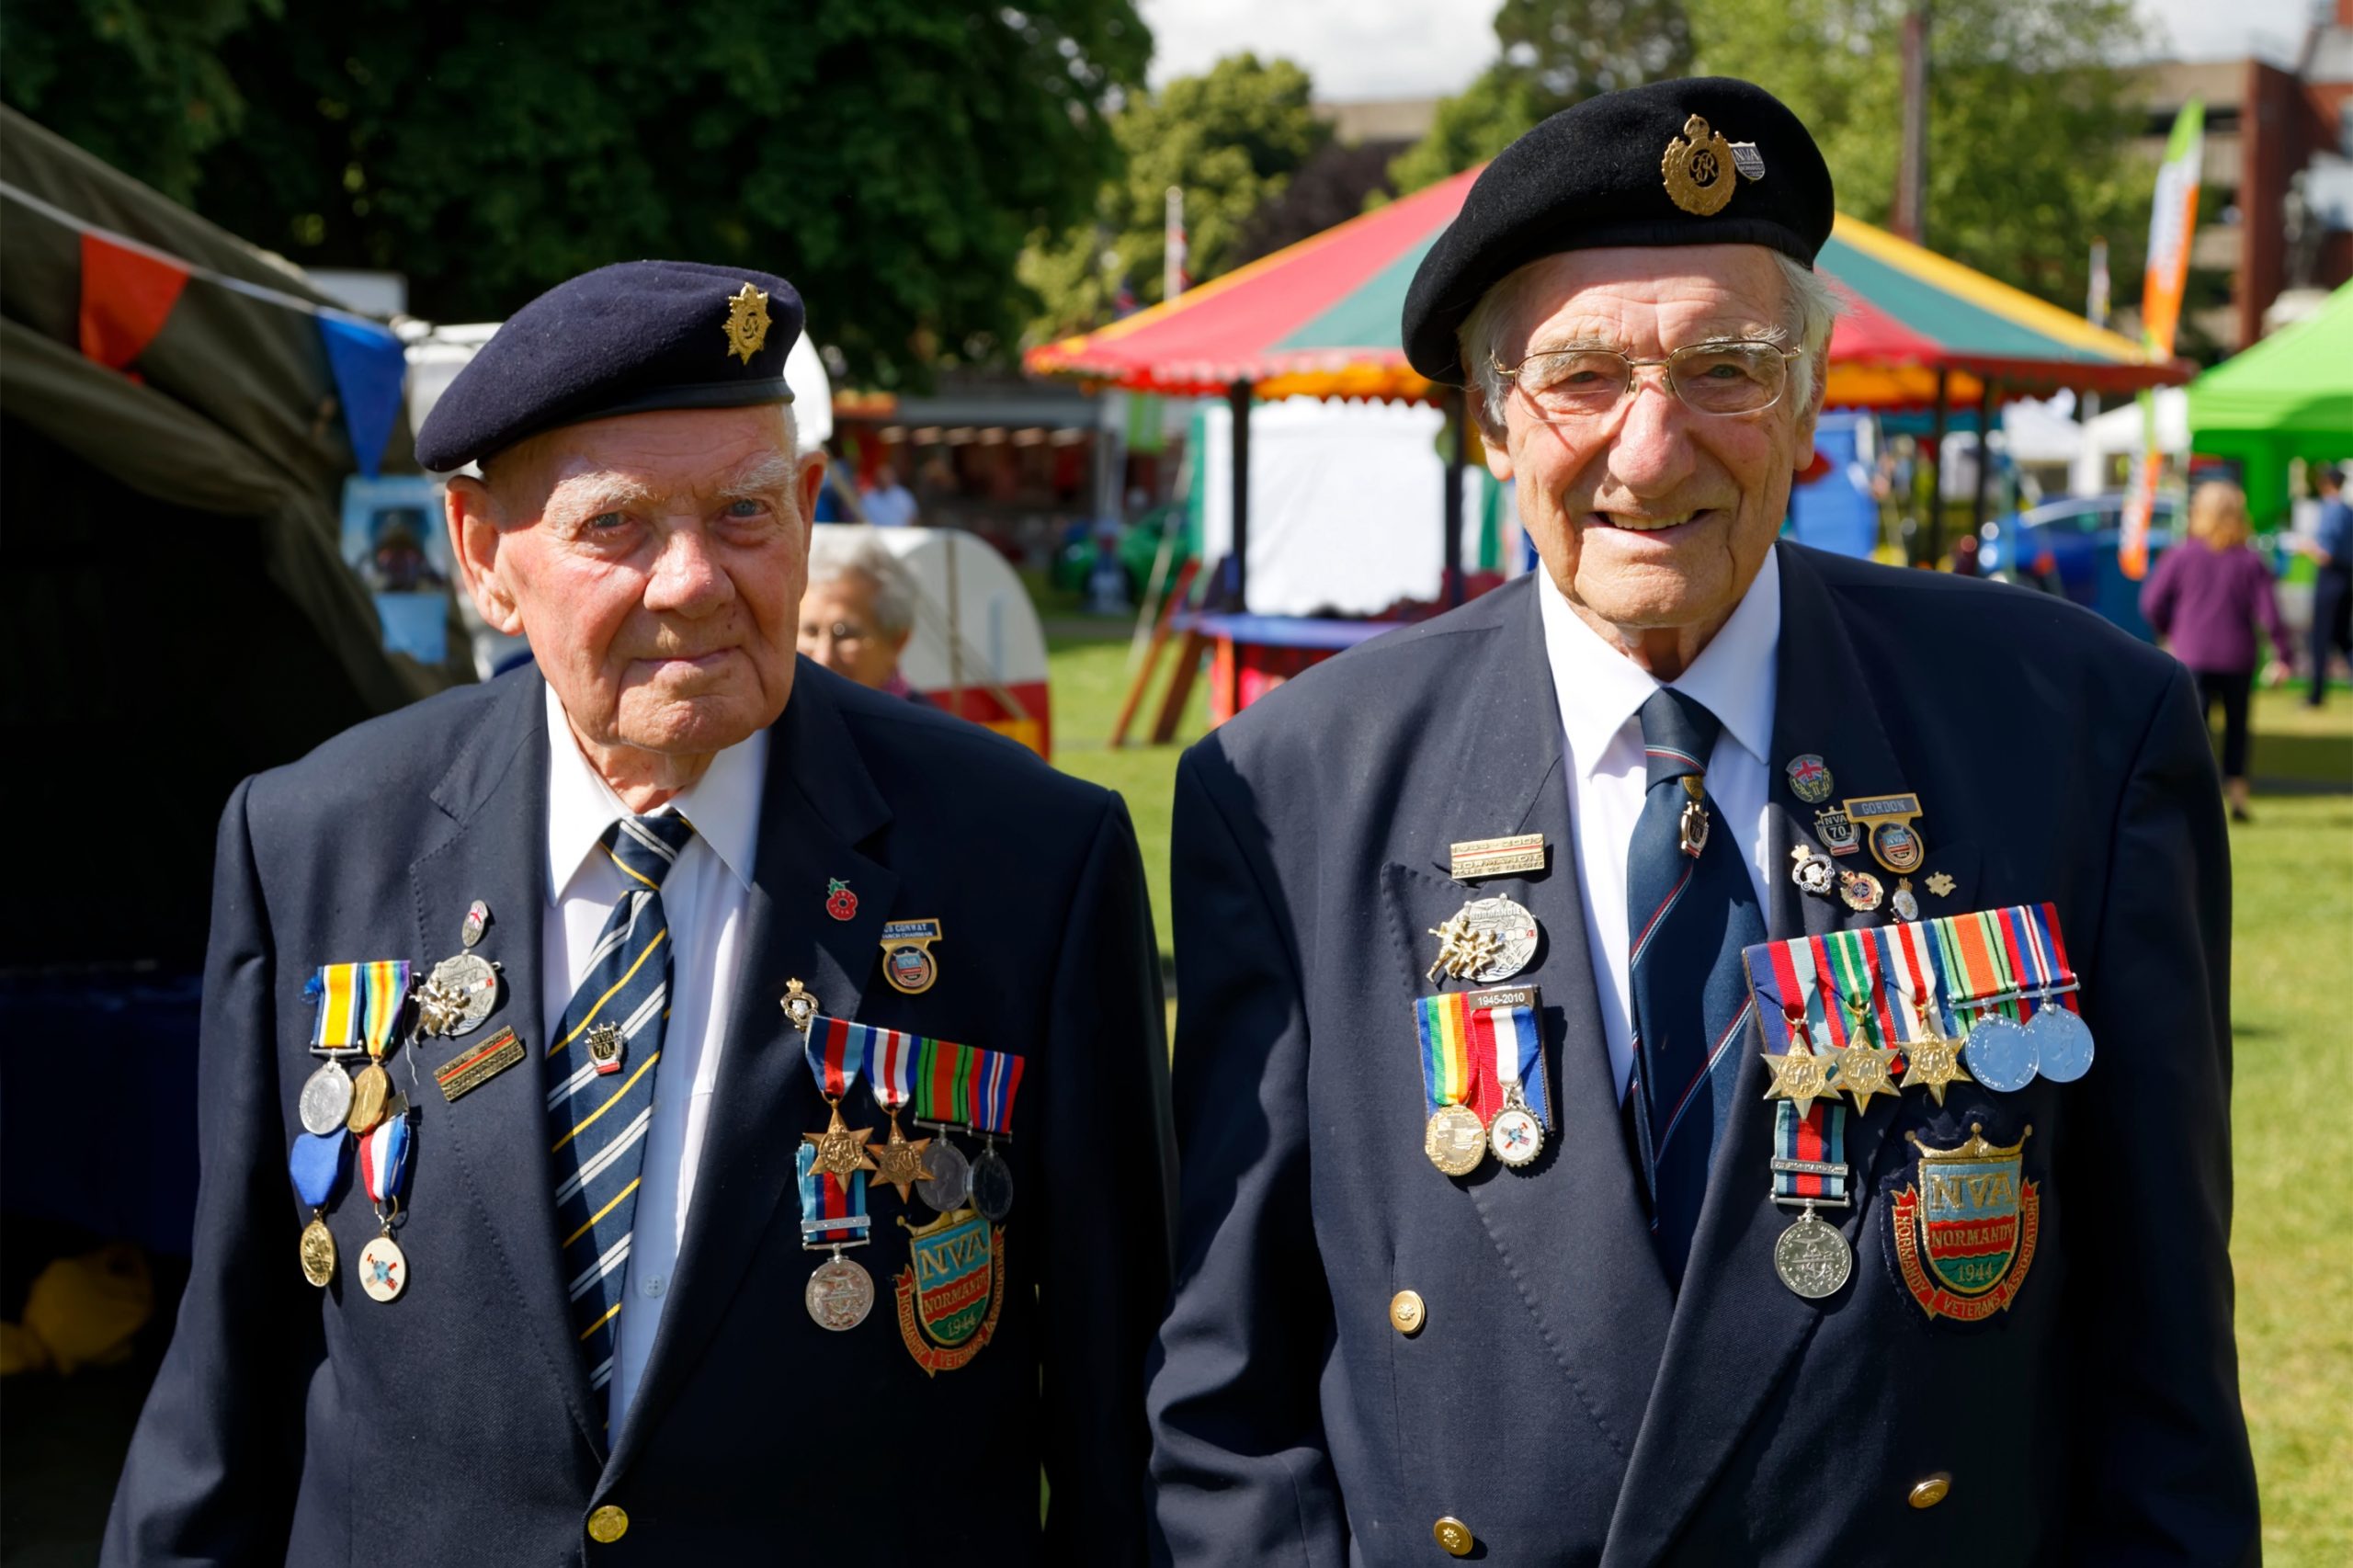 World War 2 Veterans Bob Conway and Gordon Smith from the Normandy Veterans Association at the annual Wiltshire Armed Forces and Veterans Weekend, Trowbridge. Photo by Andrew Harker on Shutterstock